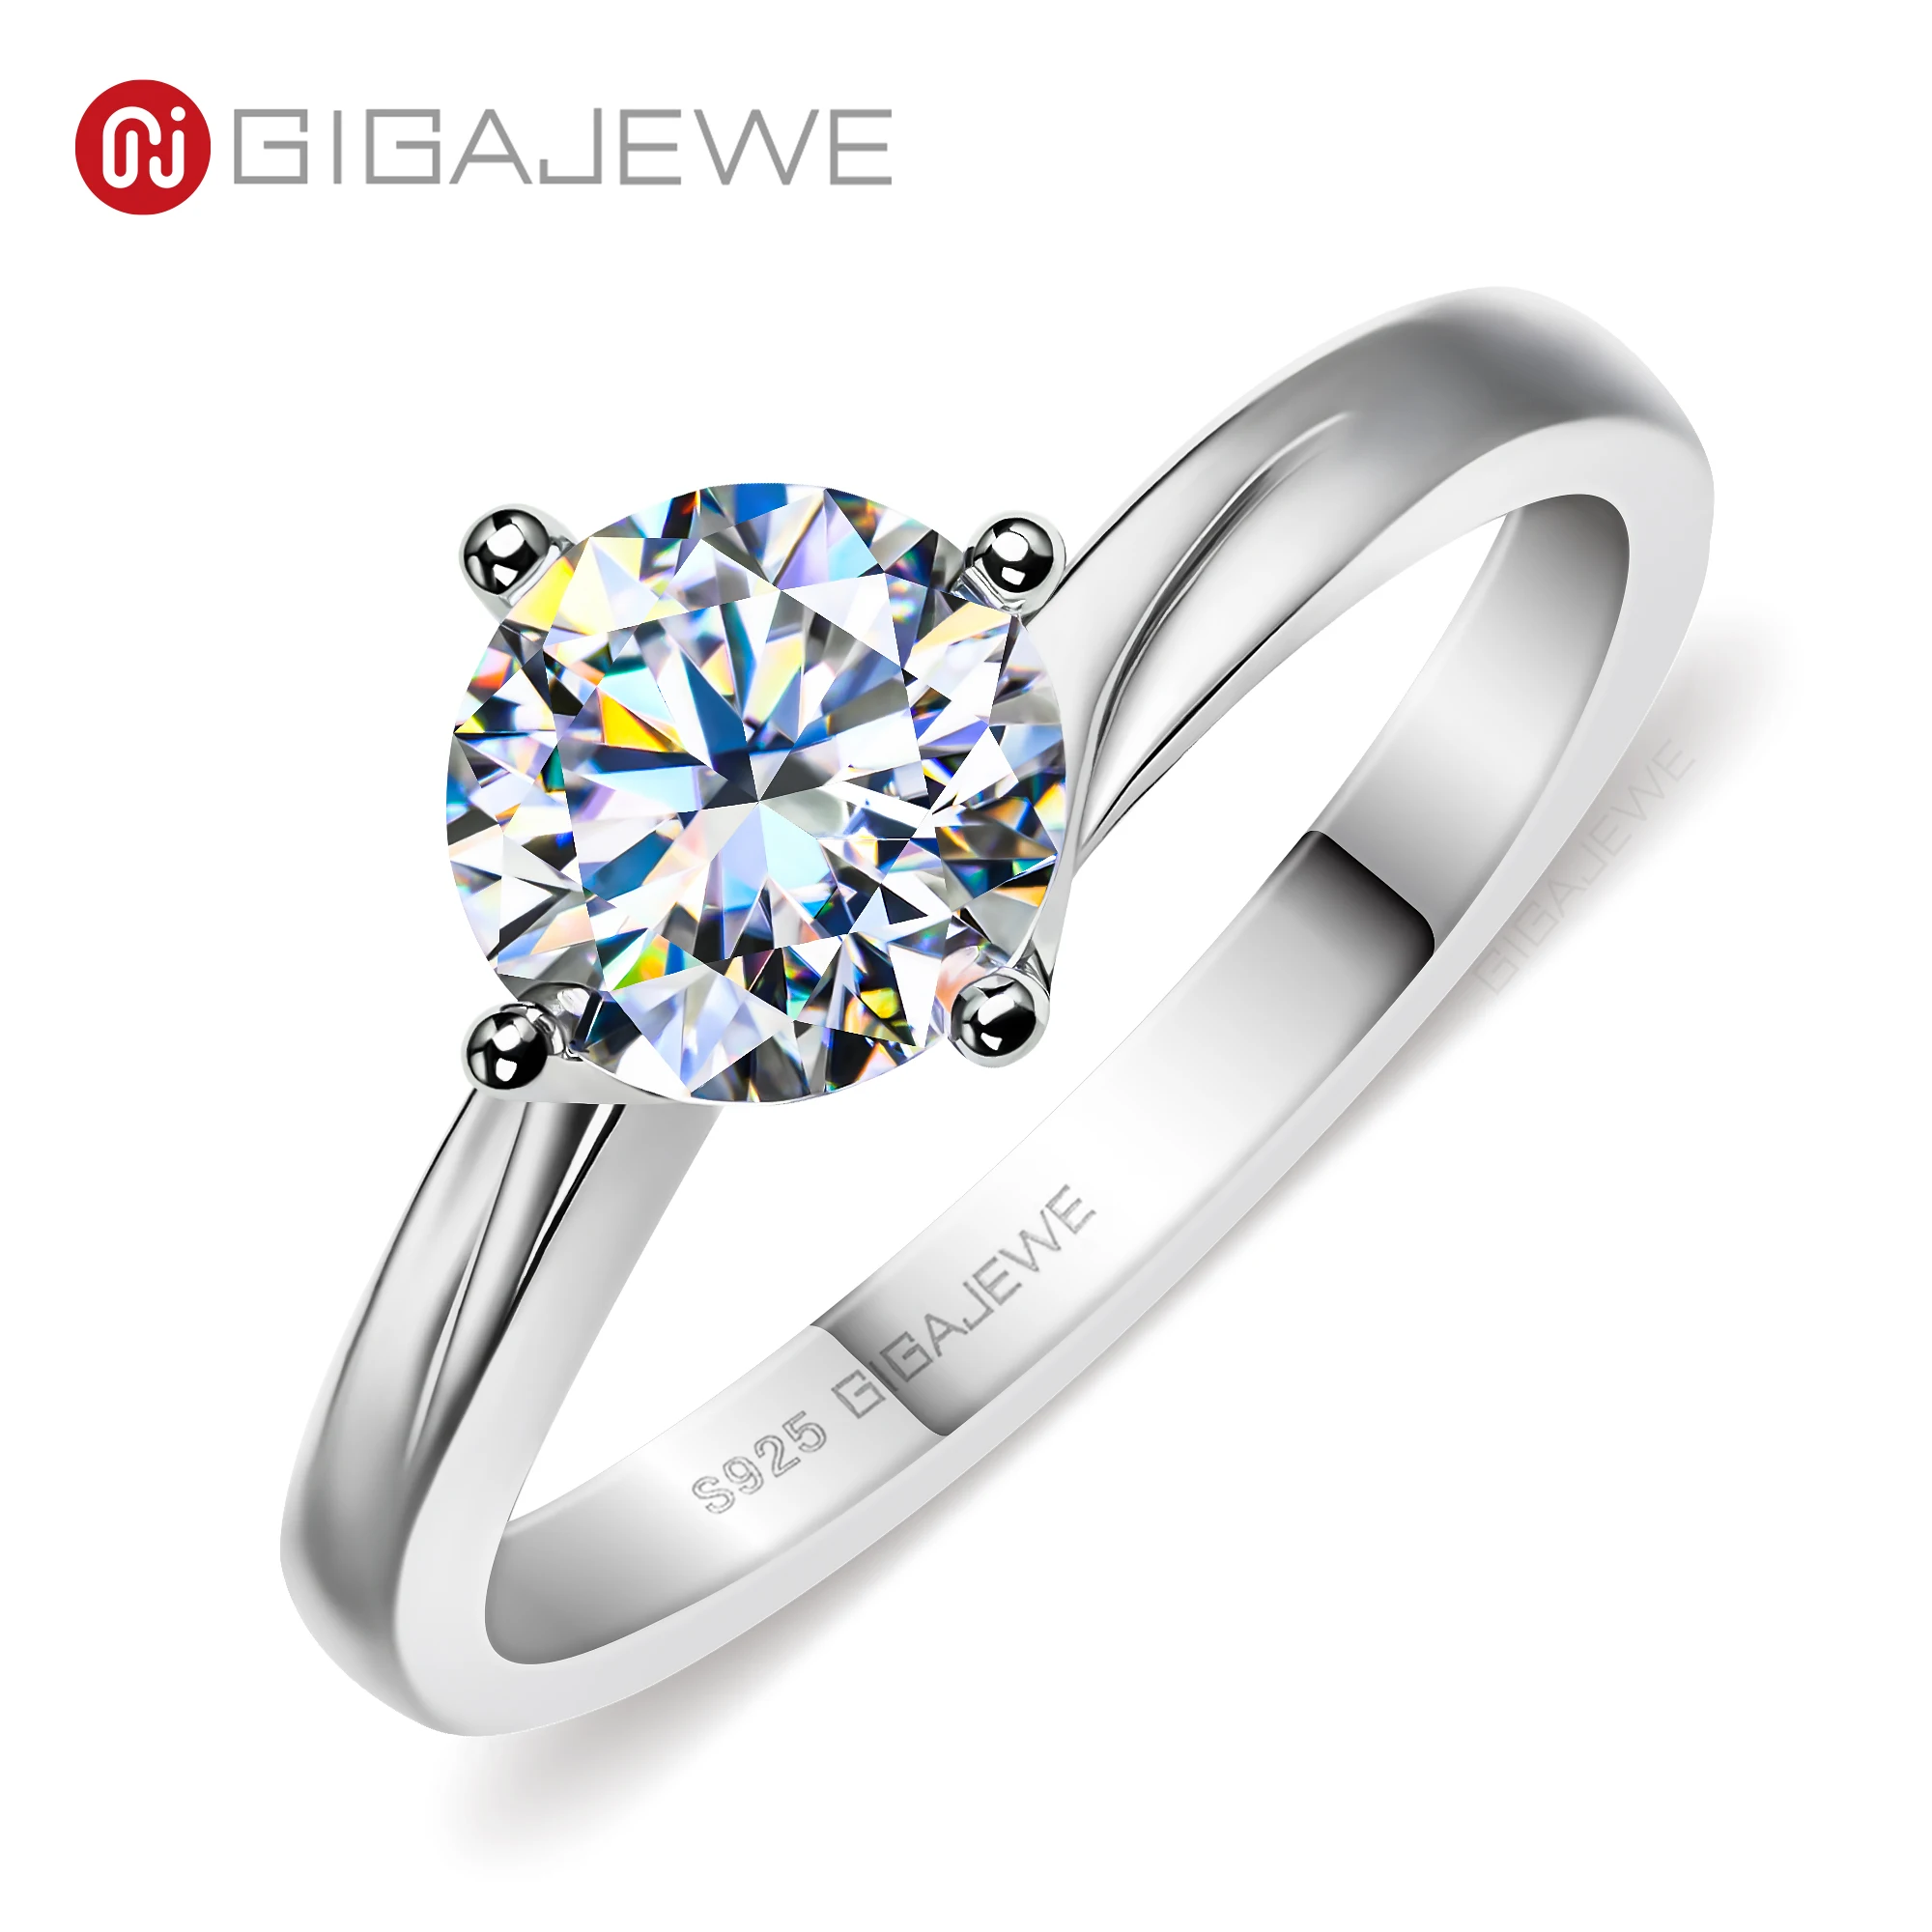 

GIGAJEWE 1.0ct round white nova red sakura pink blue yellow color moissanite solid silver 925 plated with 18k gold ring